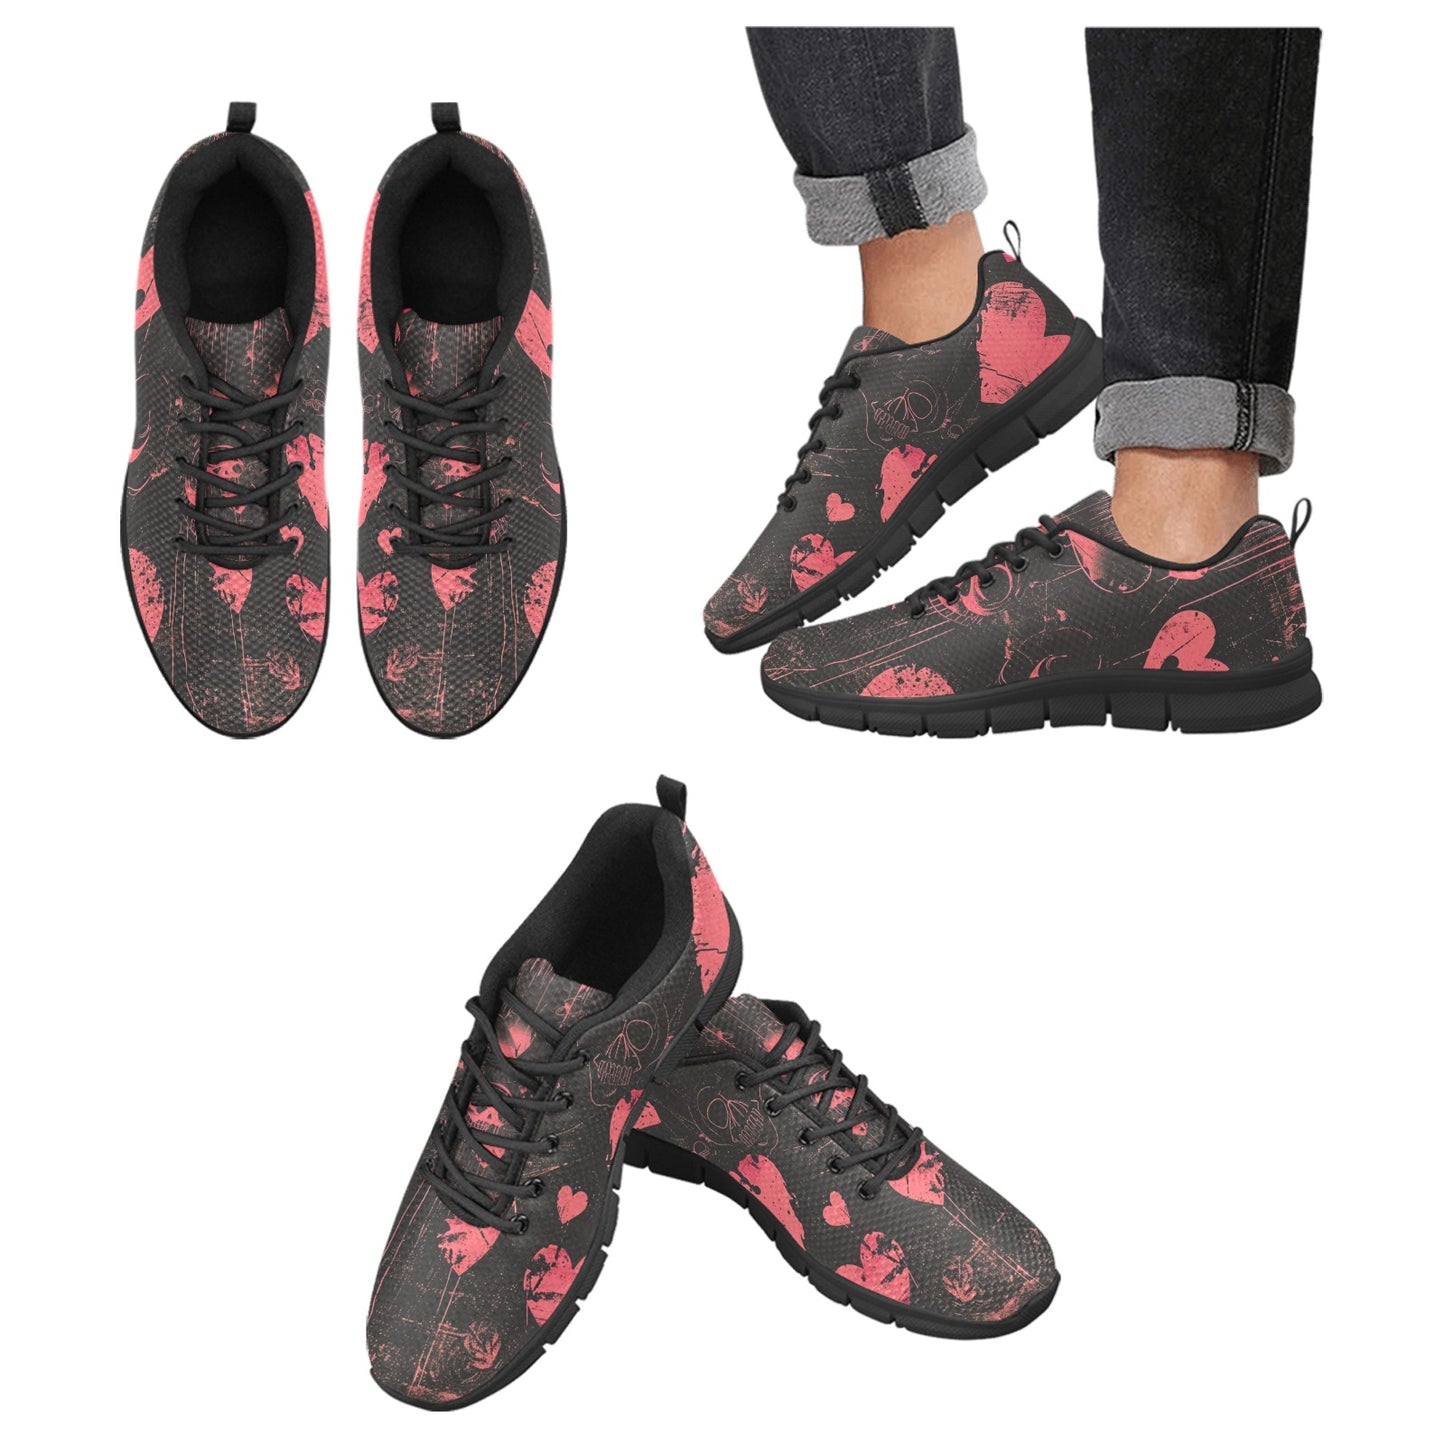 Faded Gothic Breathable Sneakers